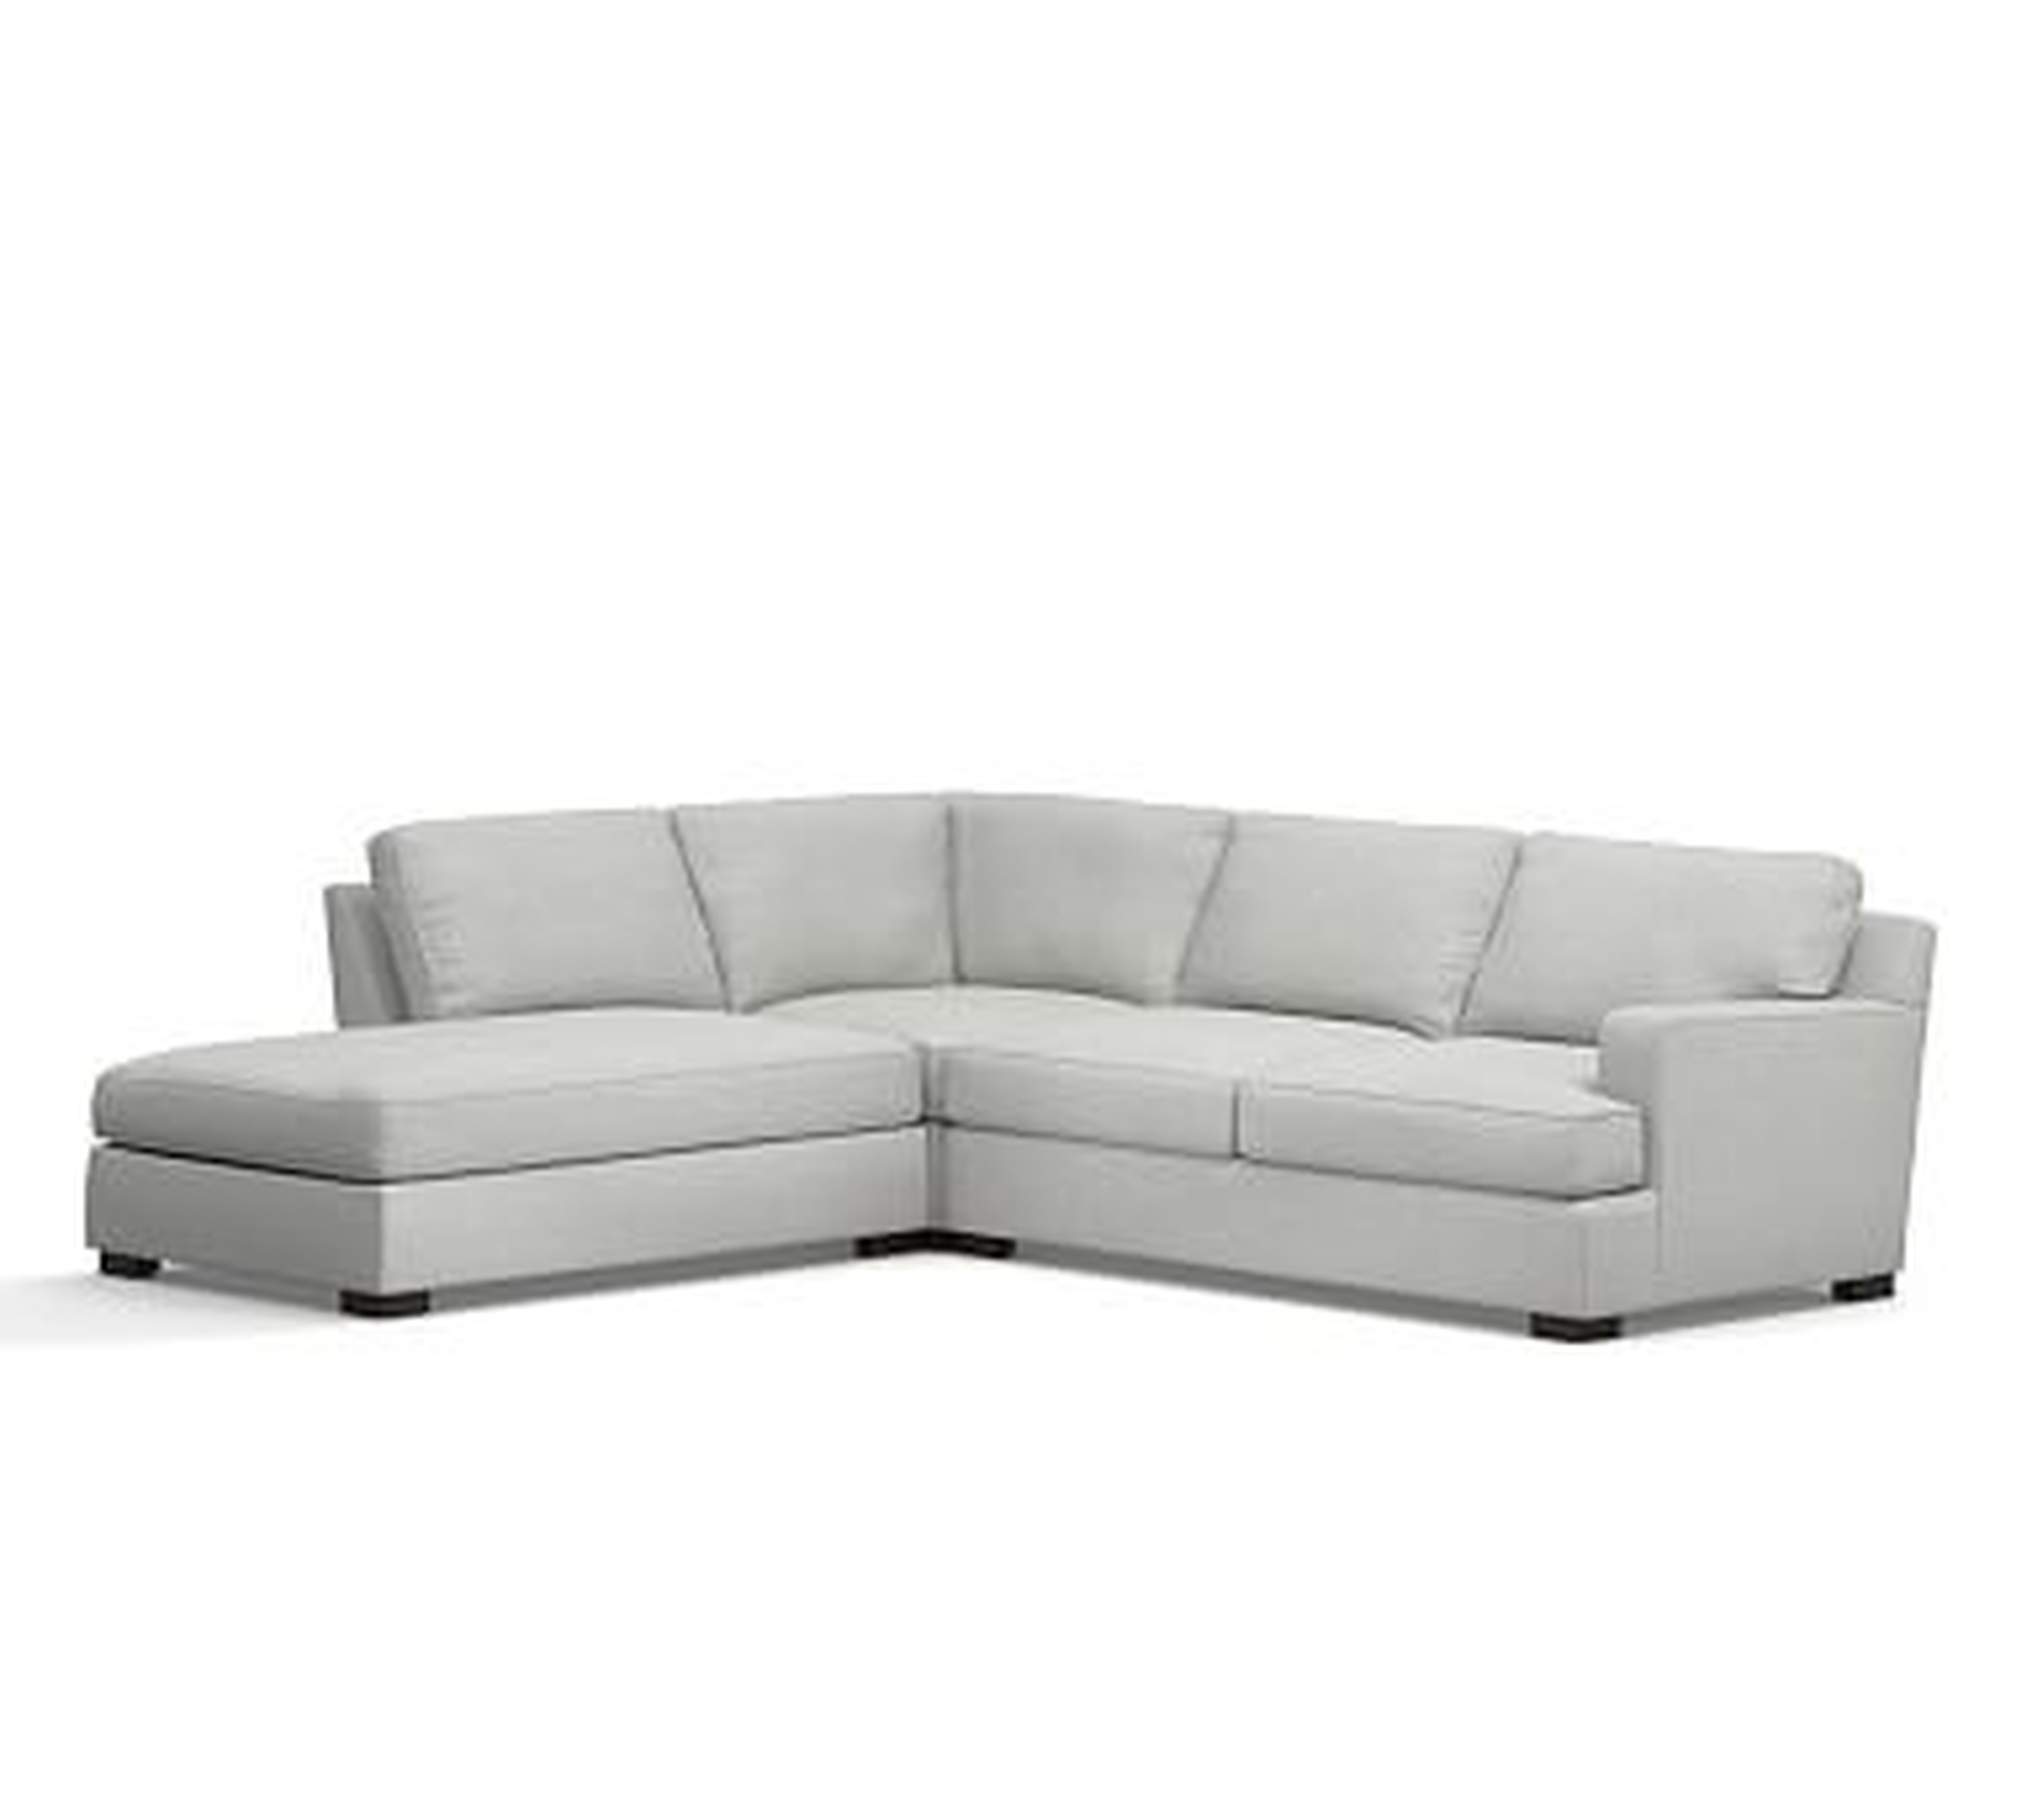 Townsend Square Arm Upholstered Right 3-Piece Bumper Sectional, Polyester Wrapped Cushions, Basketweave Slub Ash - Pottery Barn